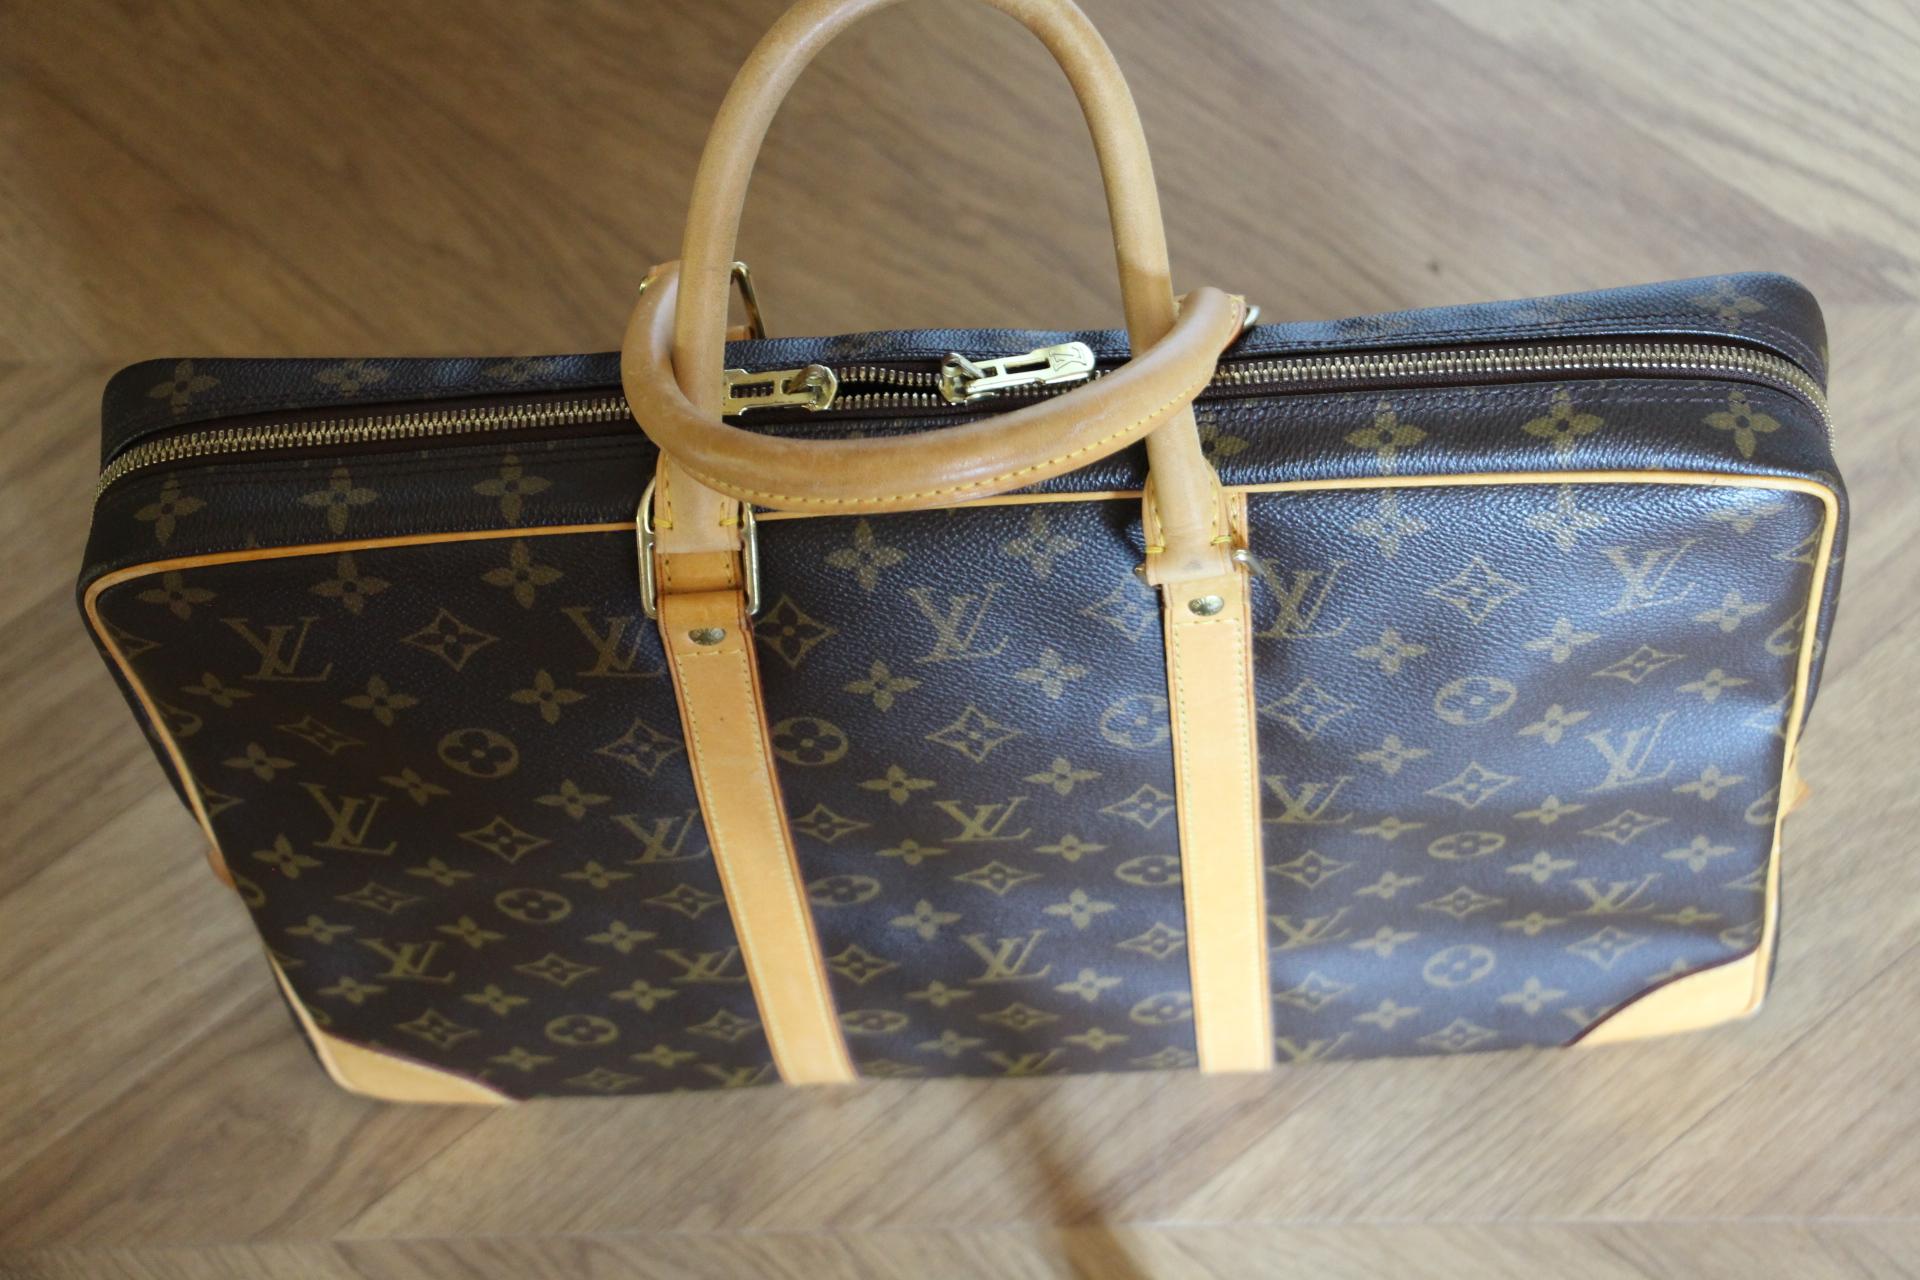  This Louis Vuitton Briefcase bag features Louis Vuitton monogram and cowhide leather, dual rolled leather top handles, one with zip closure and two-way zip closures at top. Its interior is very clean, no stain,no smell.It is printed Louis Vuitton